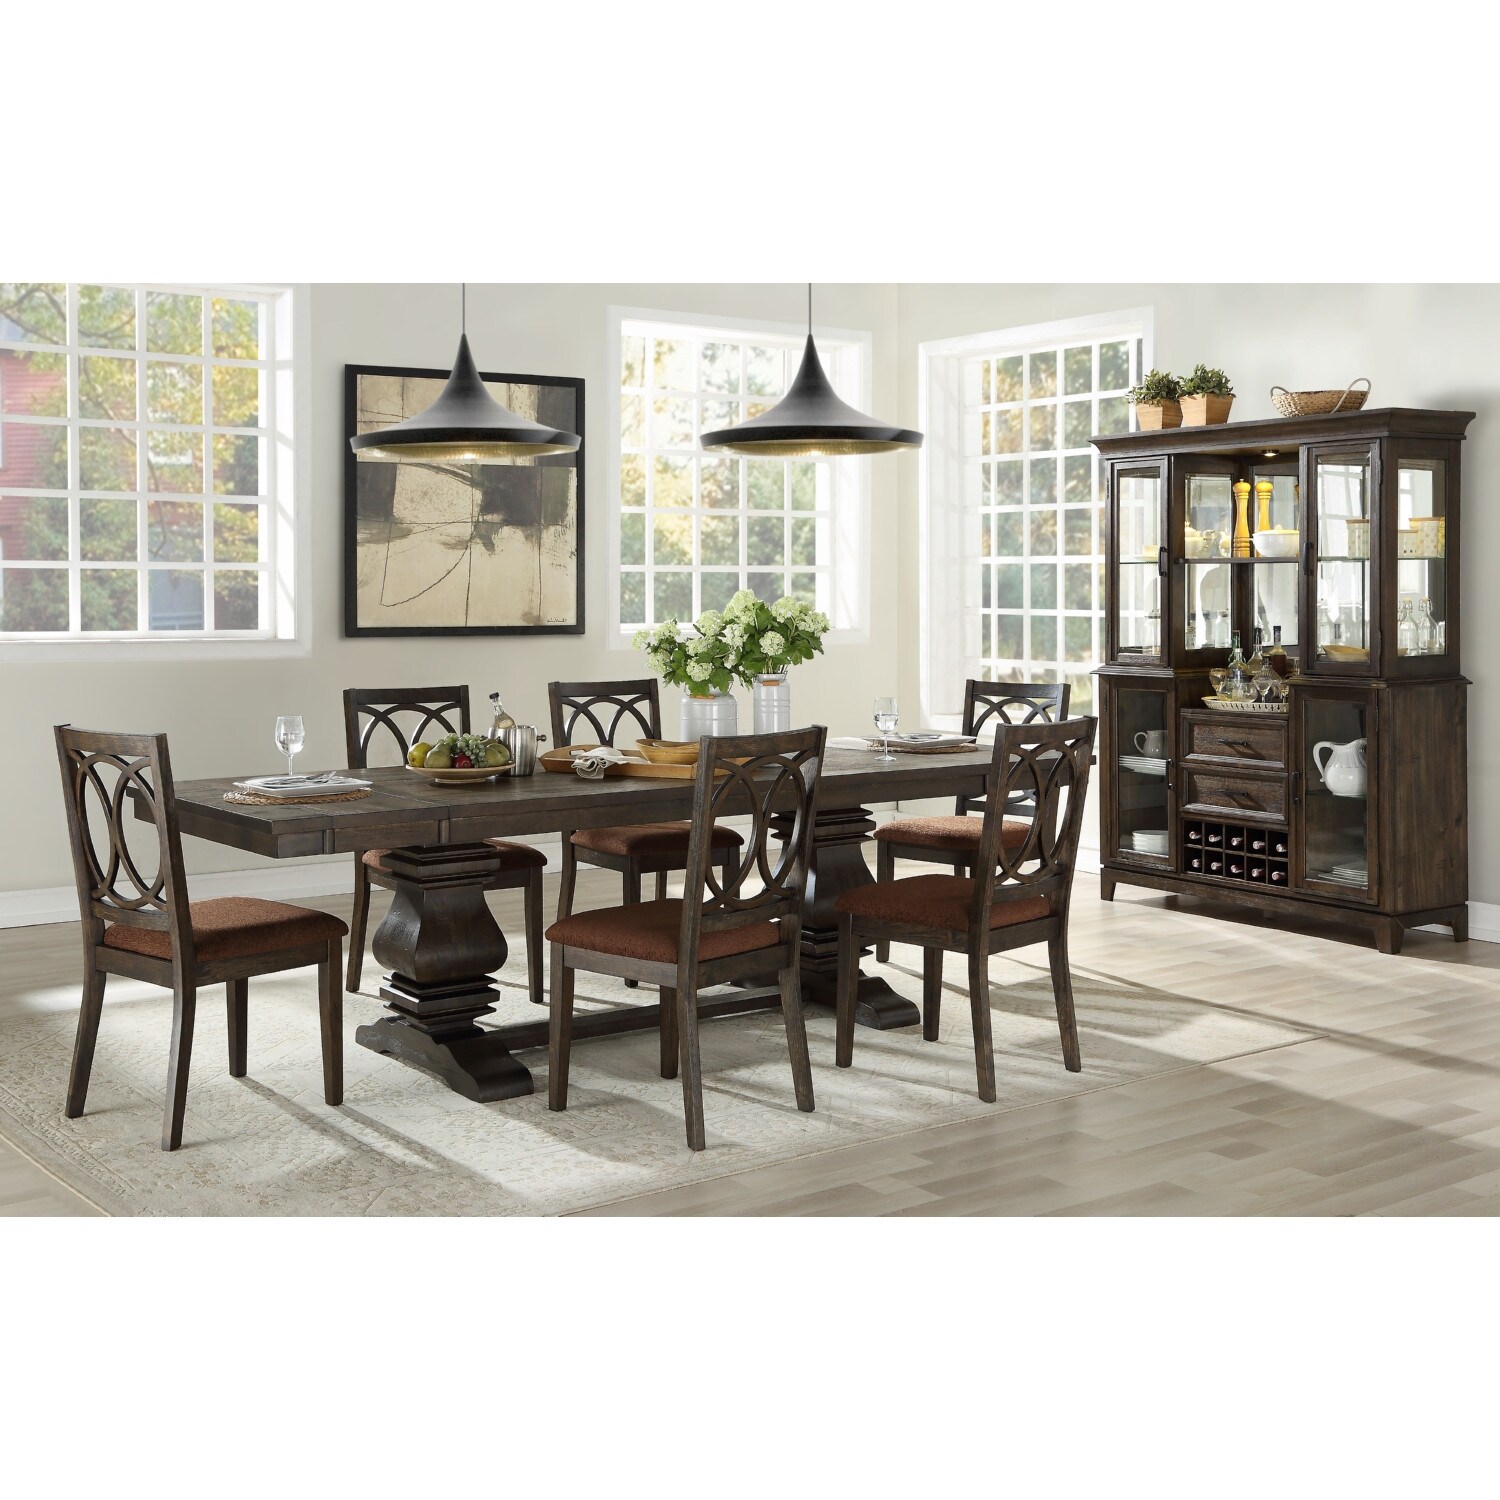 Rectangular Wood Dining Table with 2 Leaves in Espresso